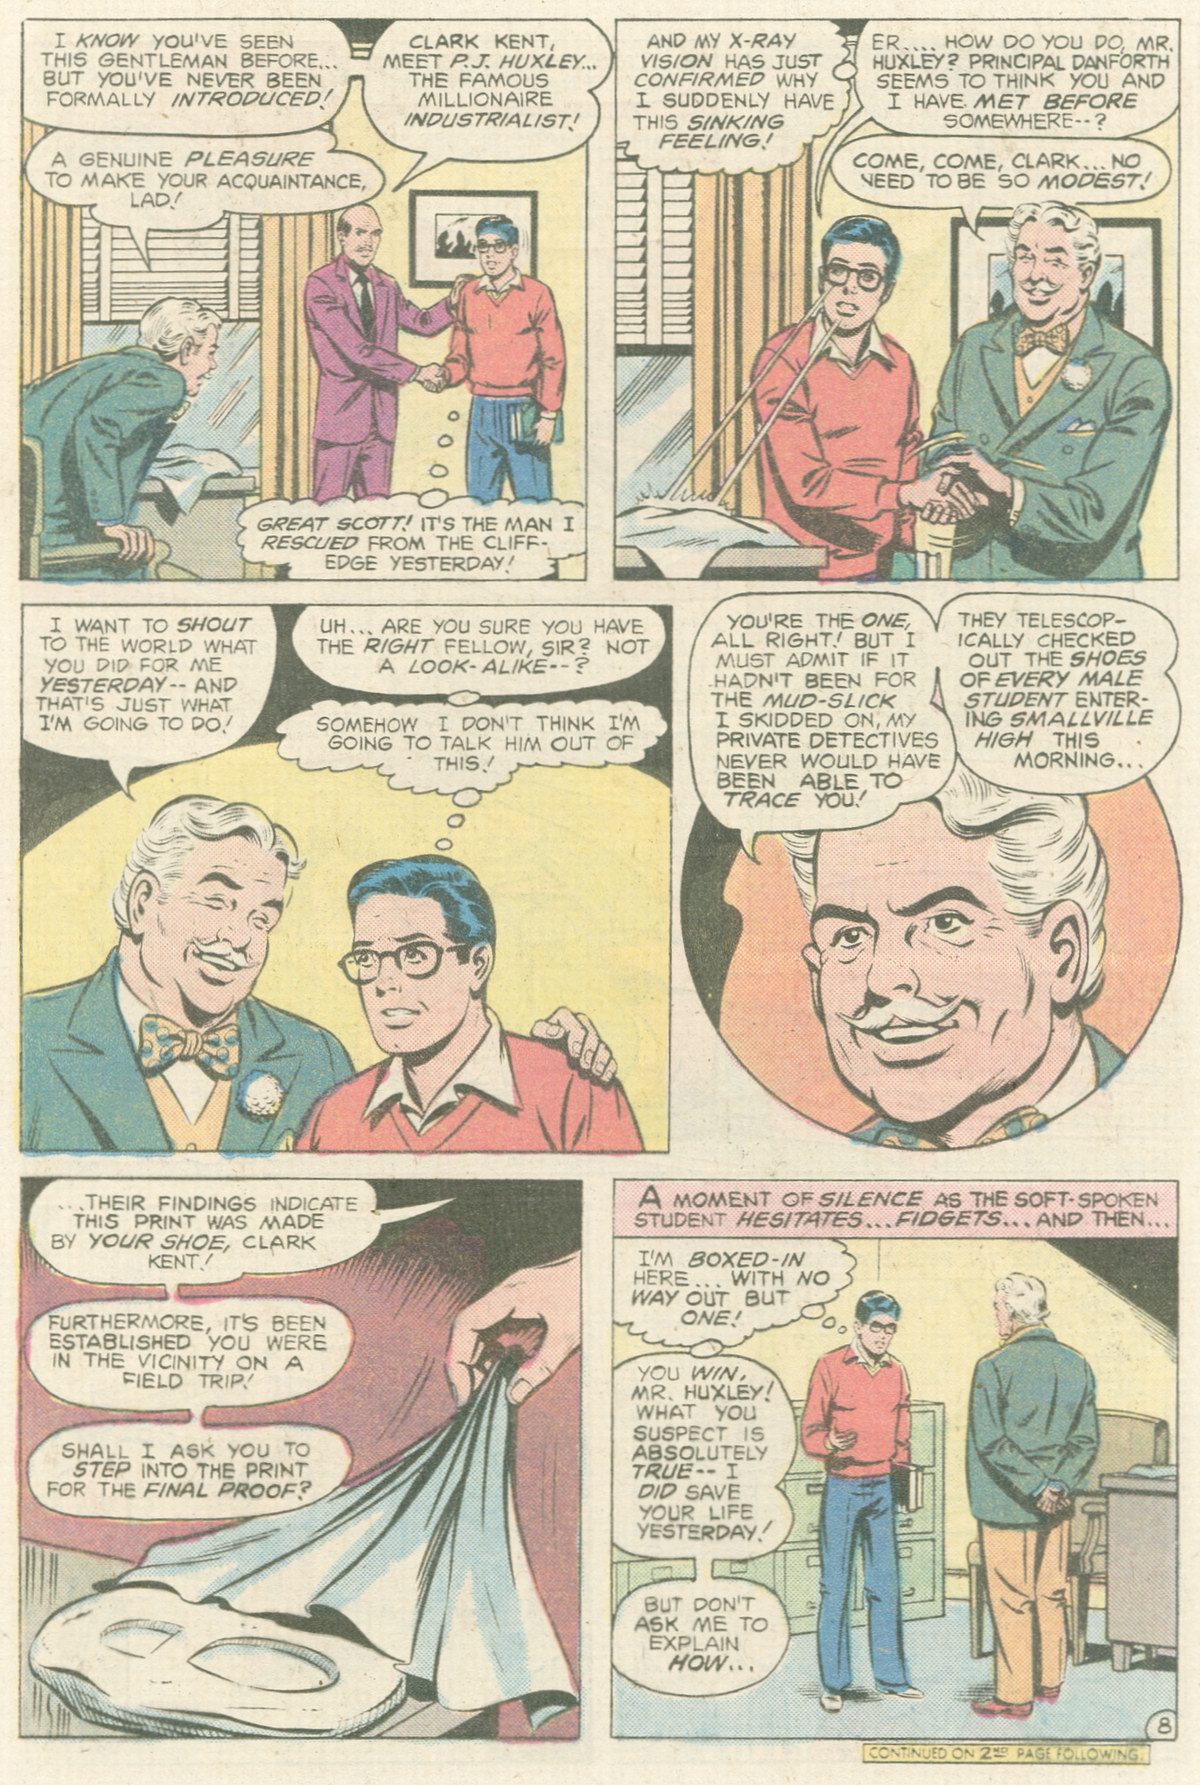 The New Adventures of Superboy 12 Page 8